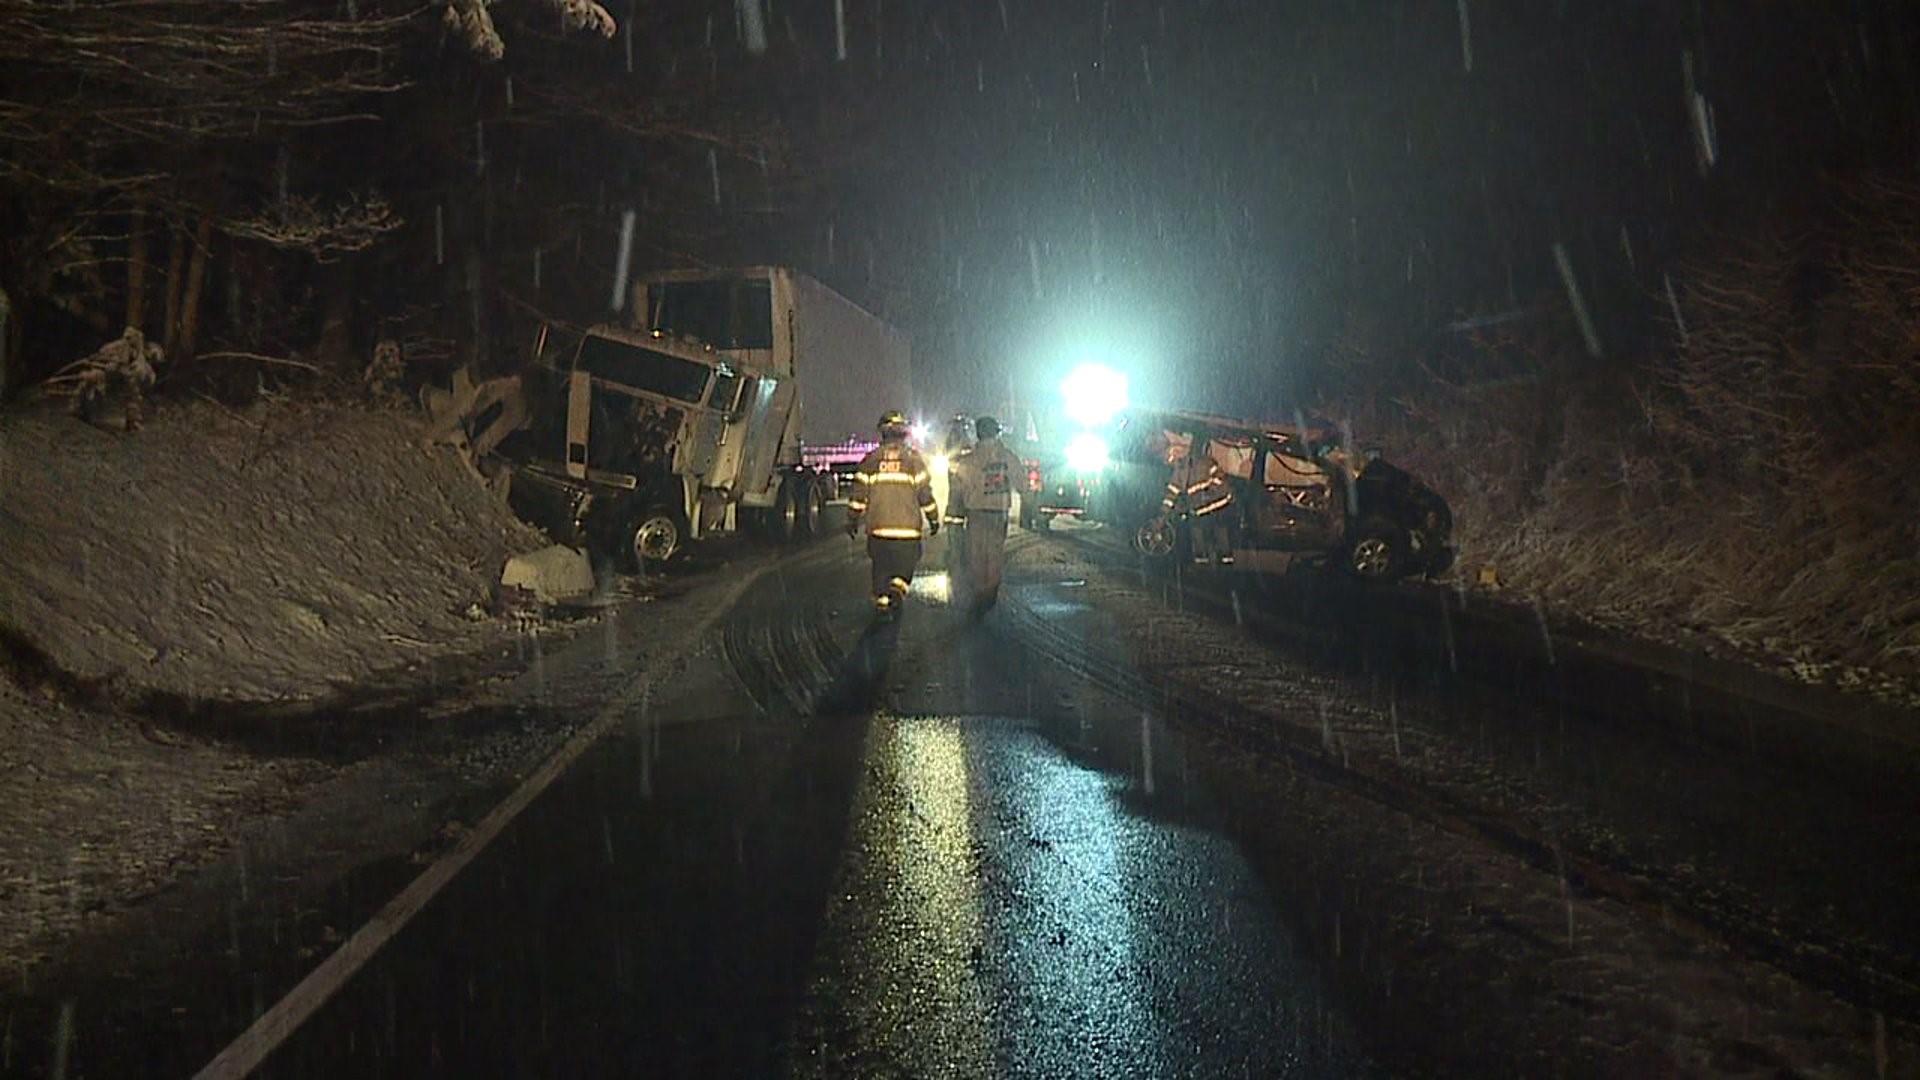 Slippery Roads to Blame for Head-on Crash in Luzerne County